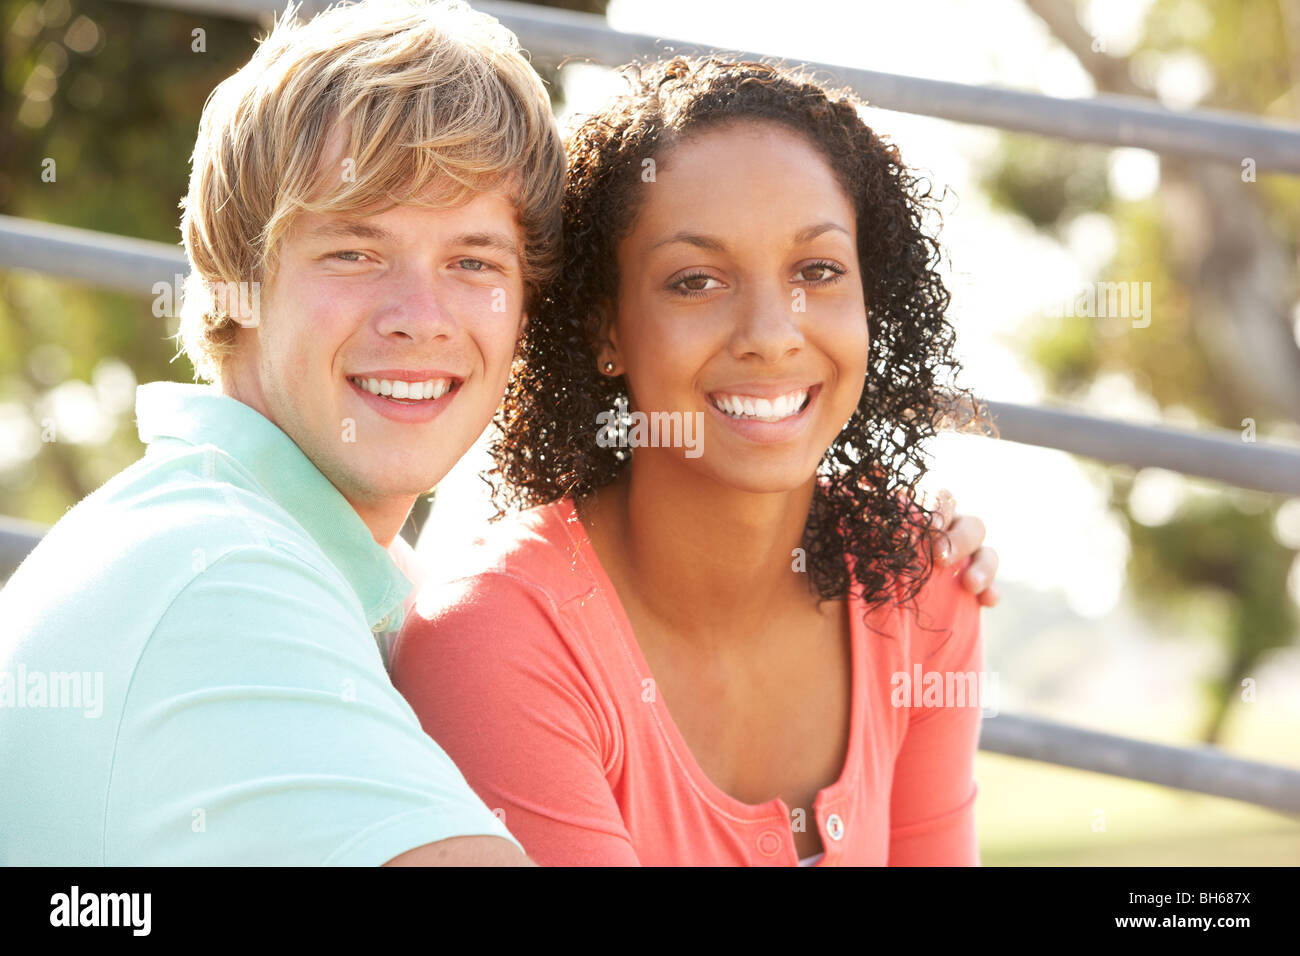 Teenage Couple Sitting in Playground Banque D'Images